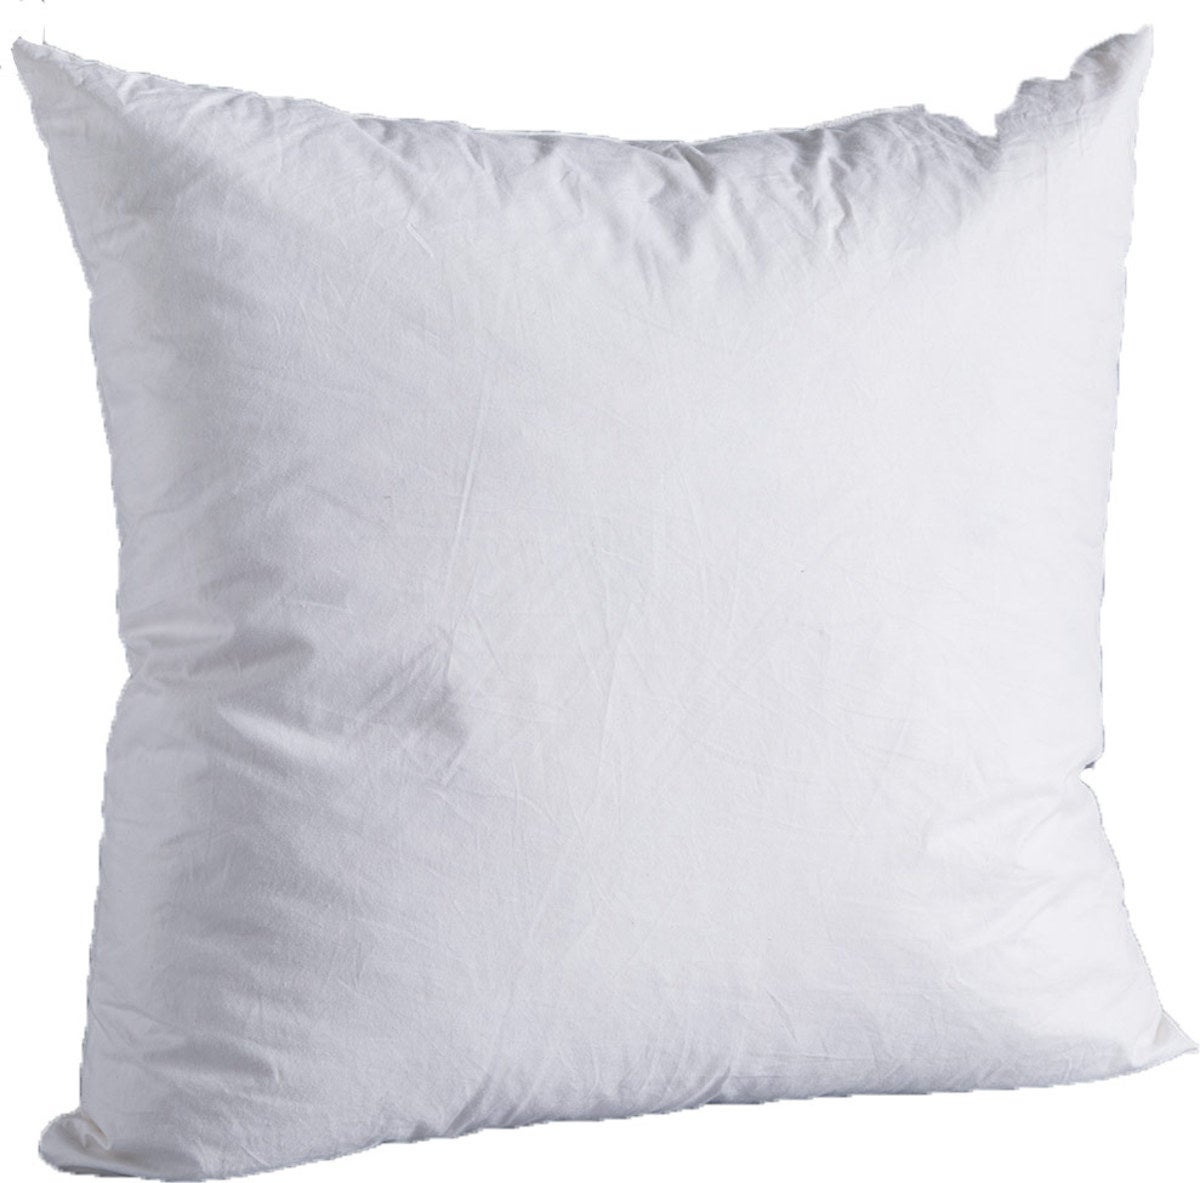 Natural Down-Filled 21"SQ. Decorative Pillow Insert